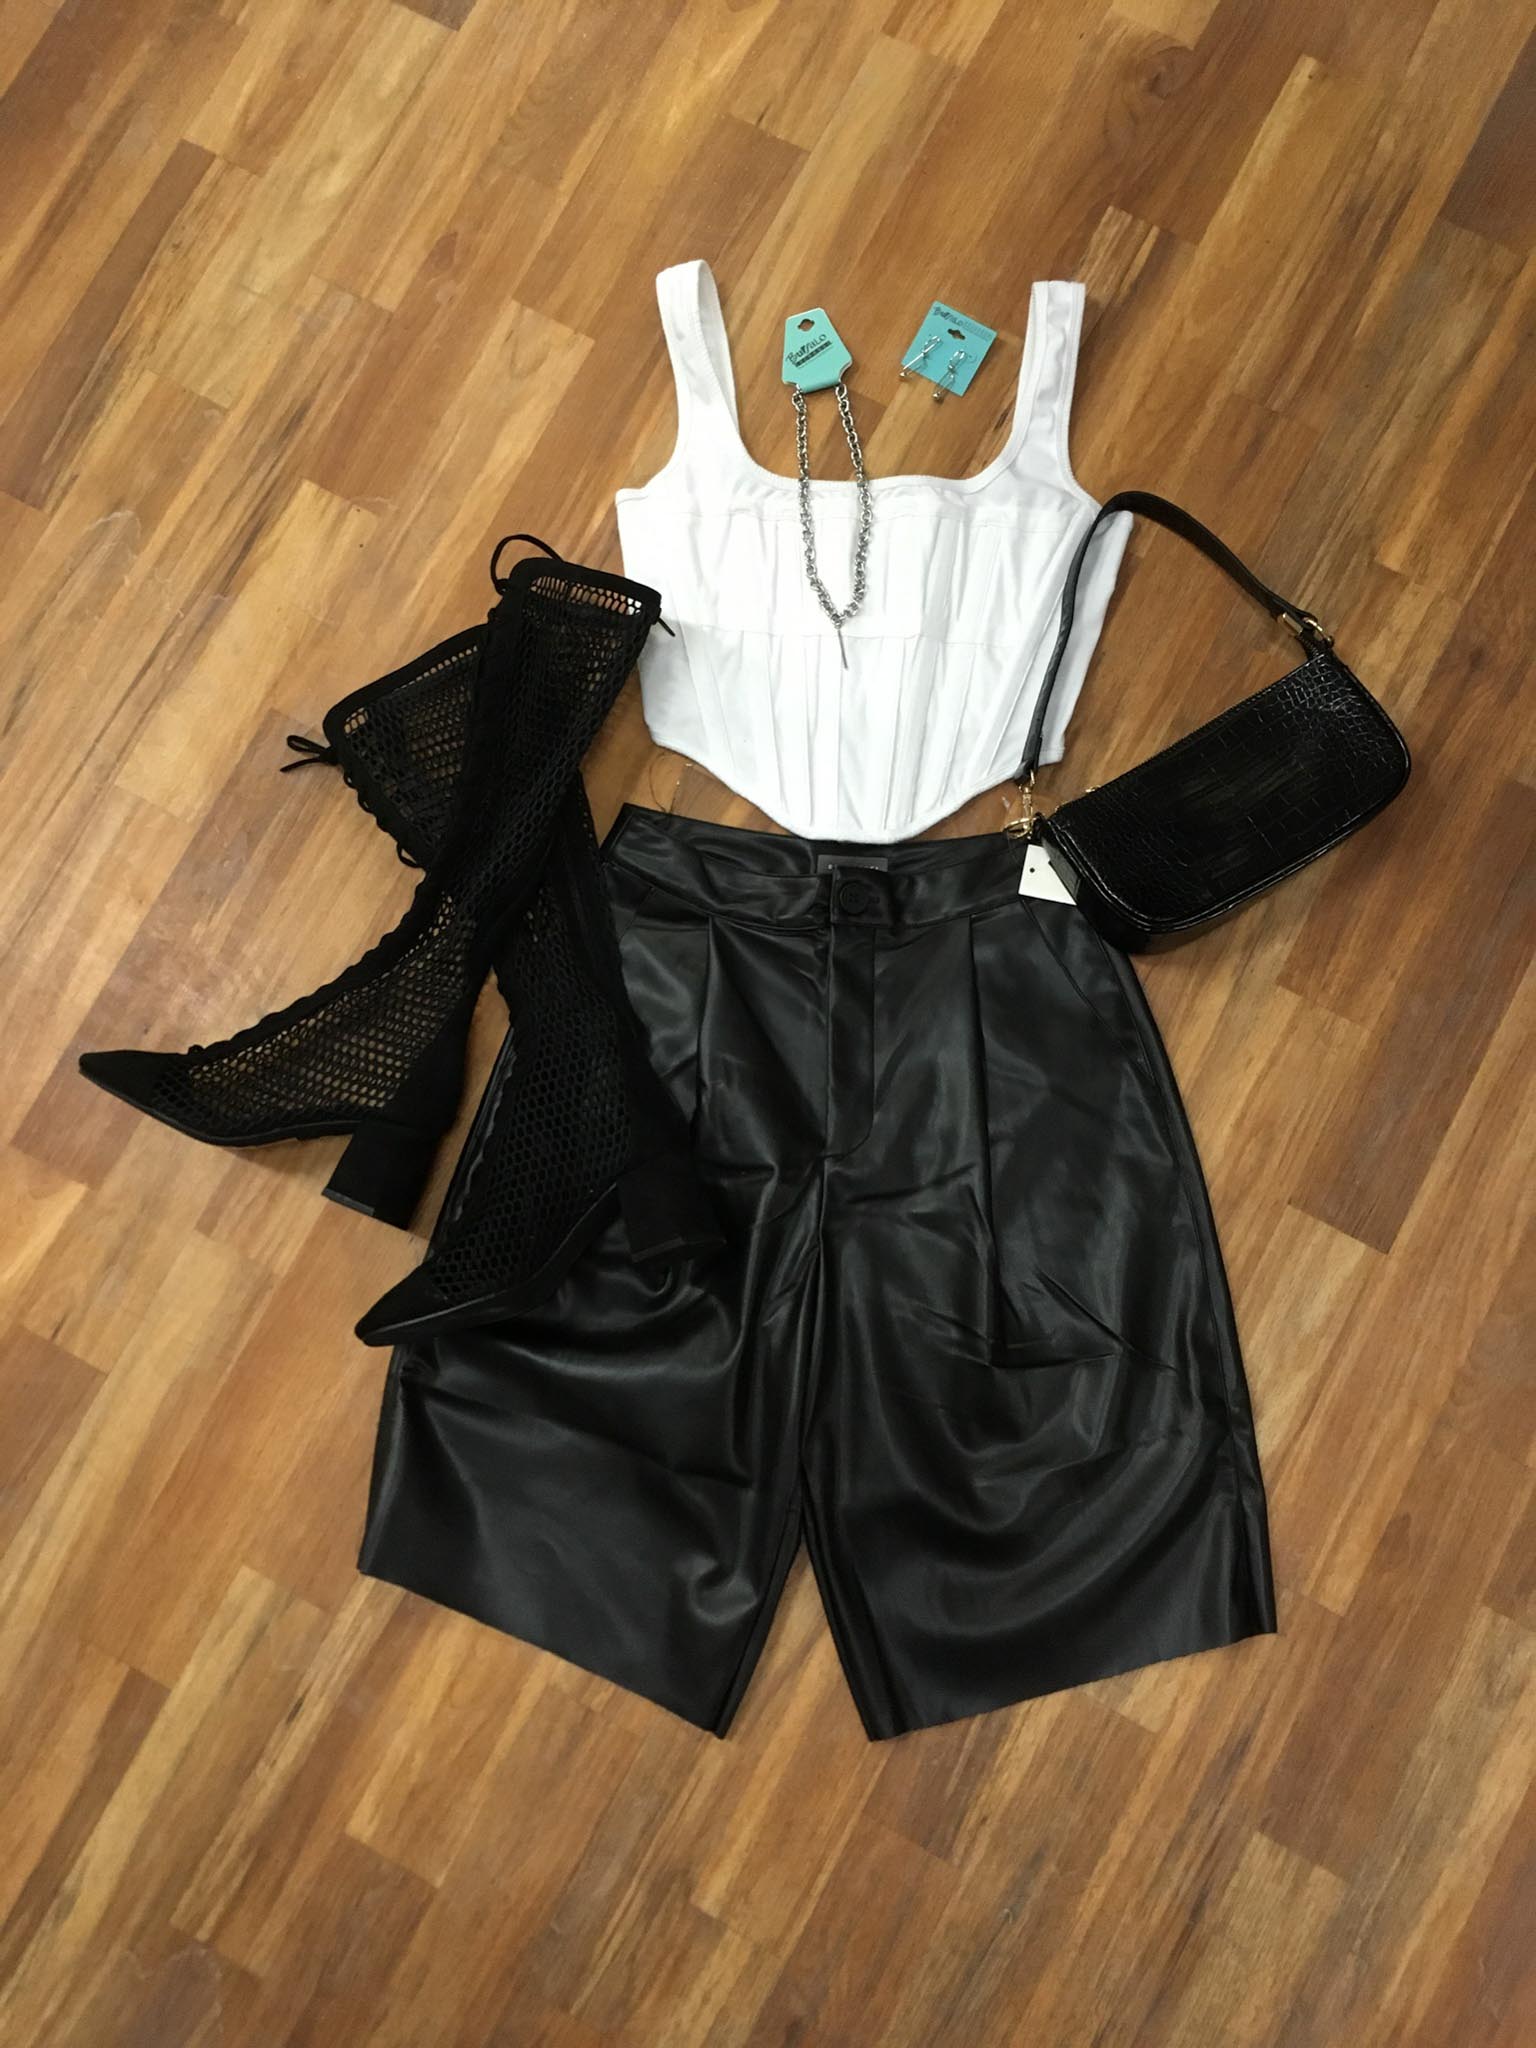 white corset tank top, vegan leather culotte shorts, black lace-up calf boots and small black baguette bag